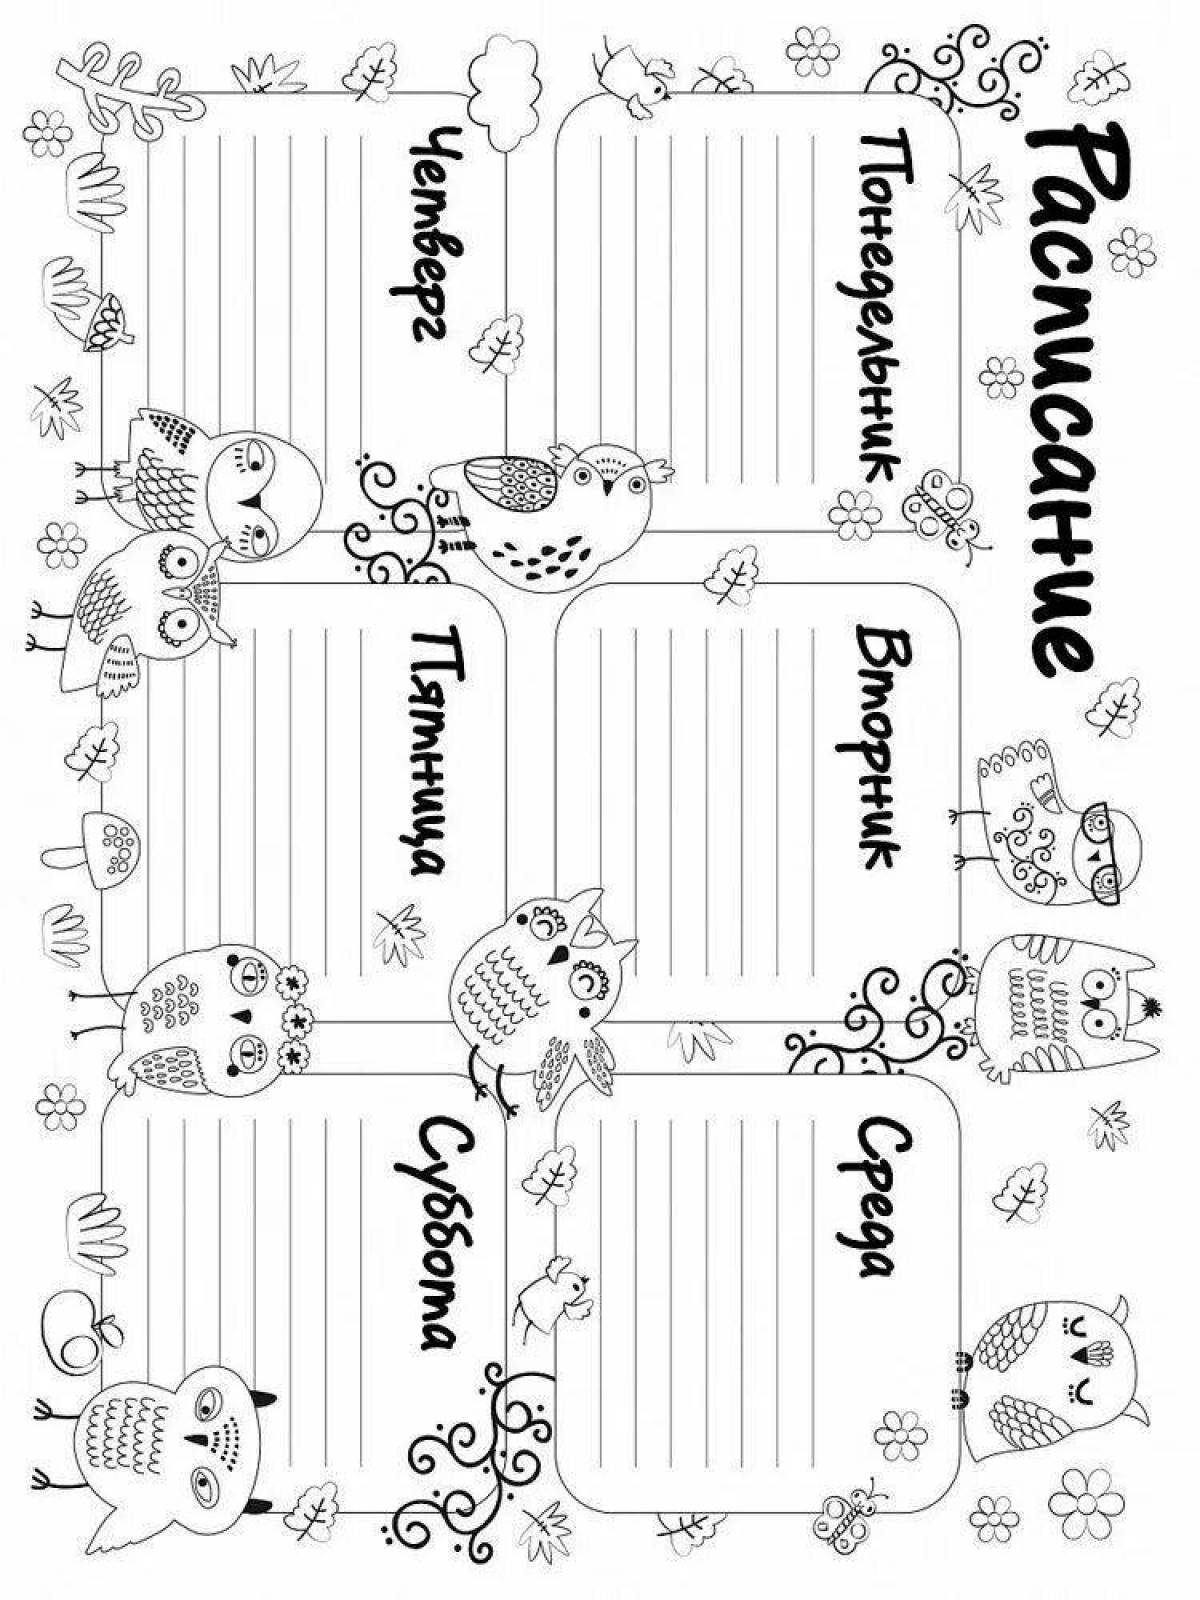 Colorful schedule coloring page